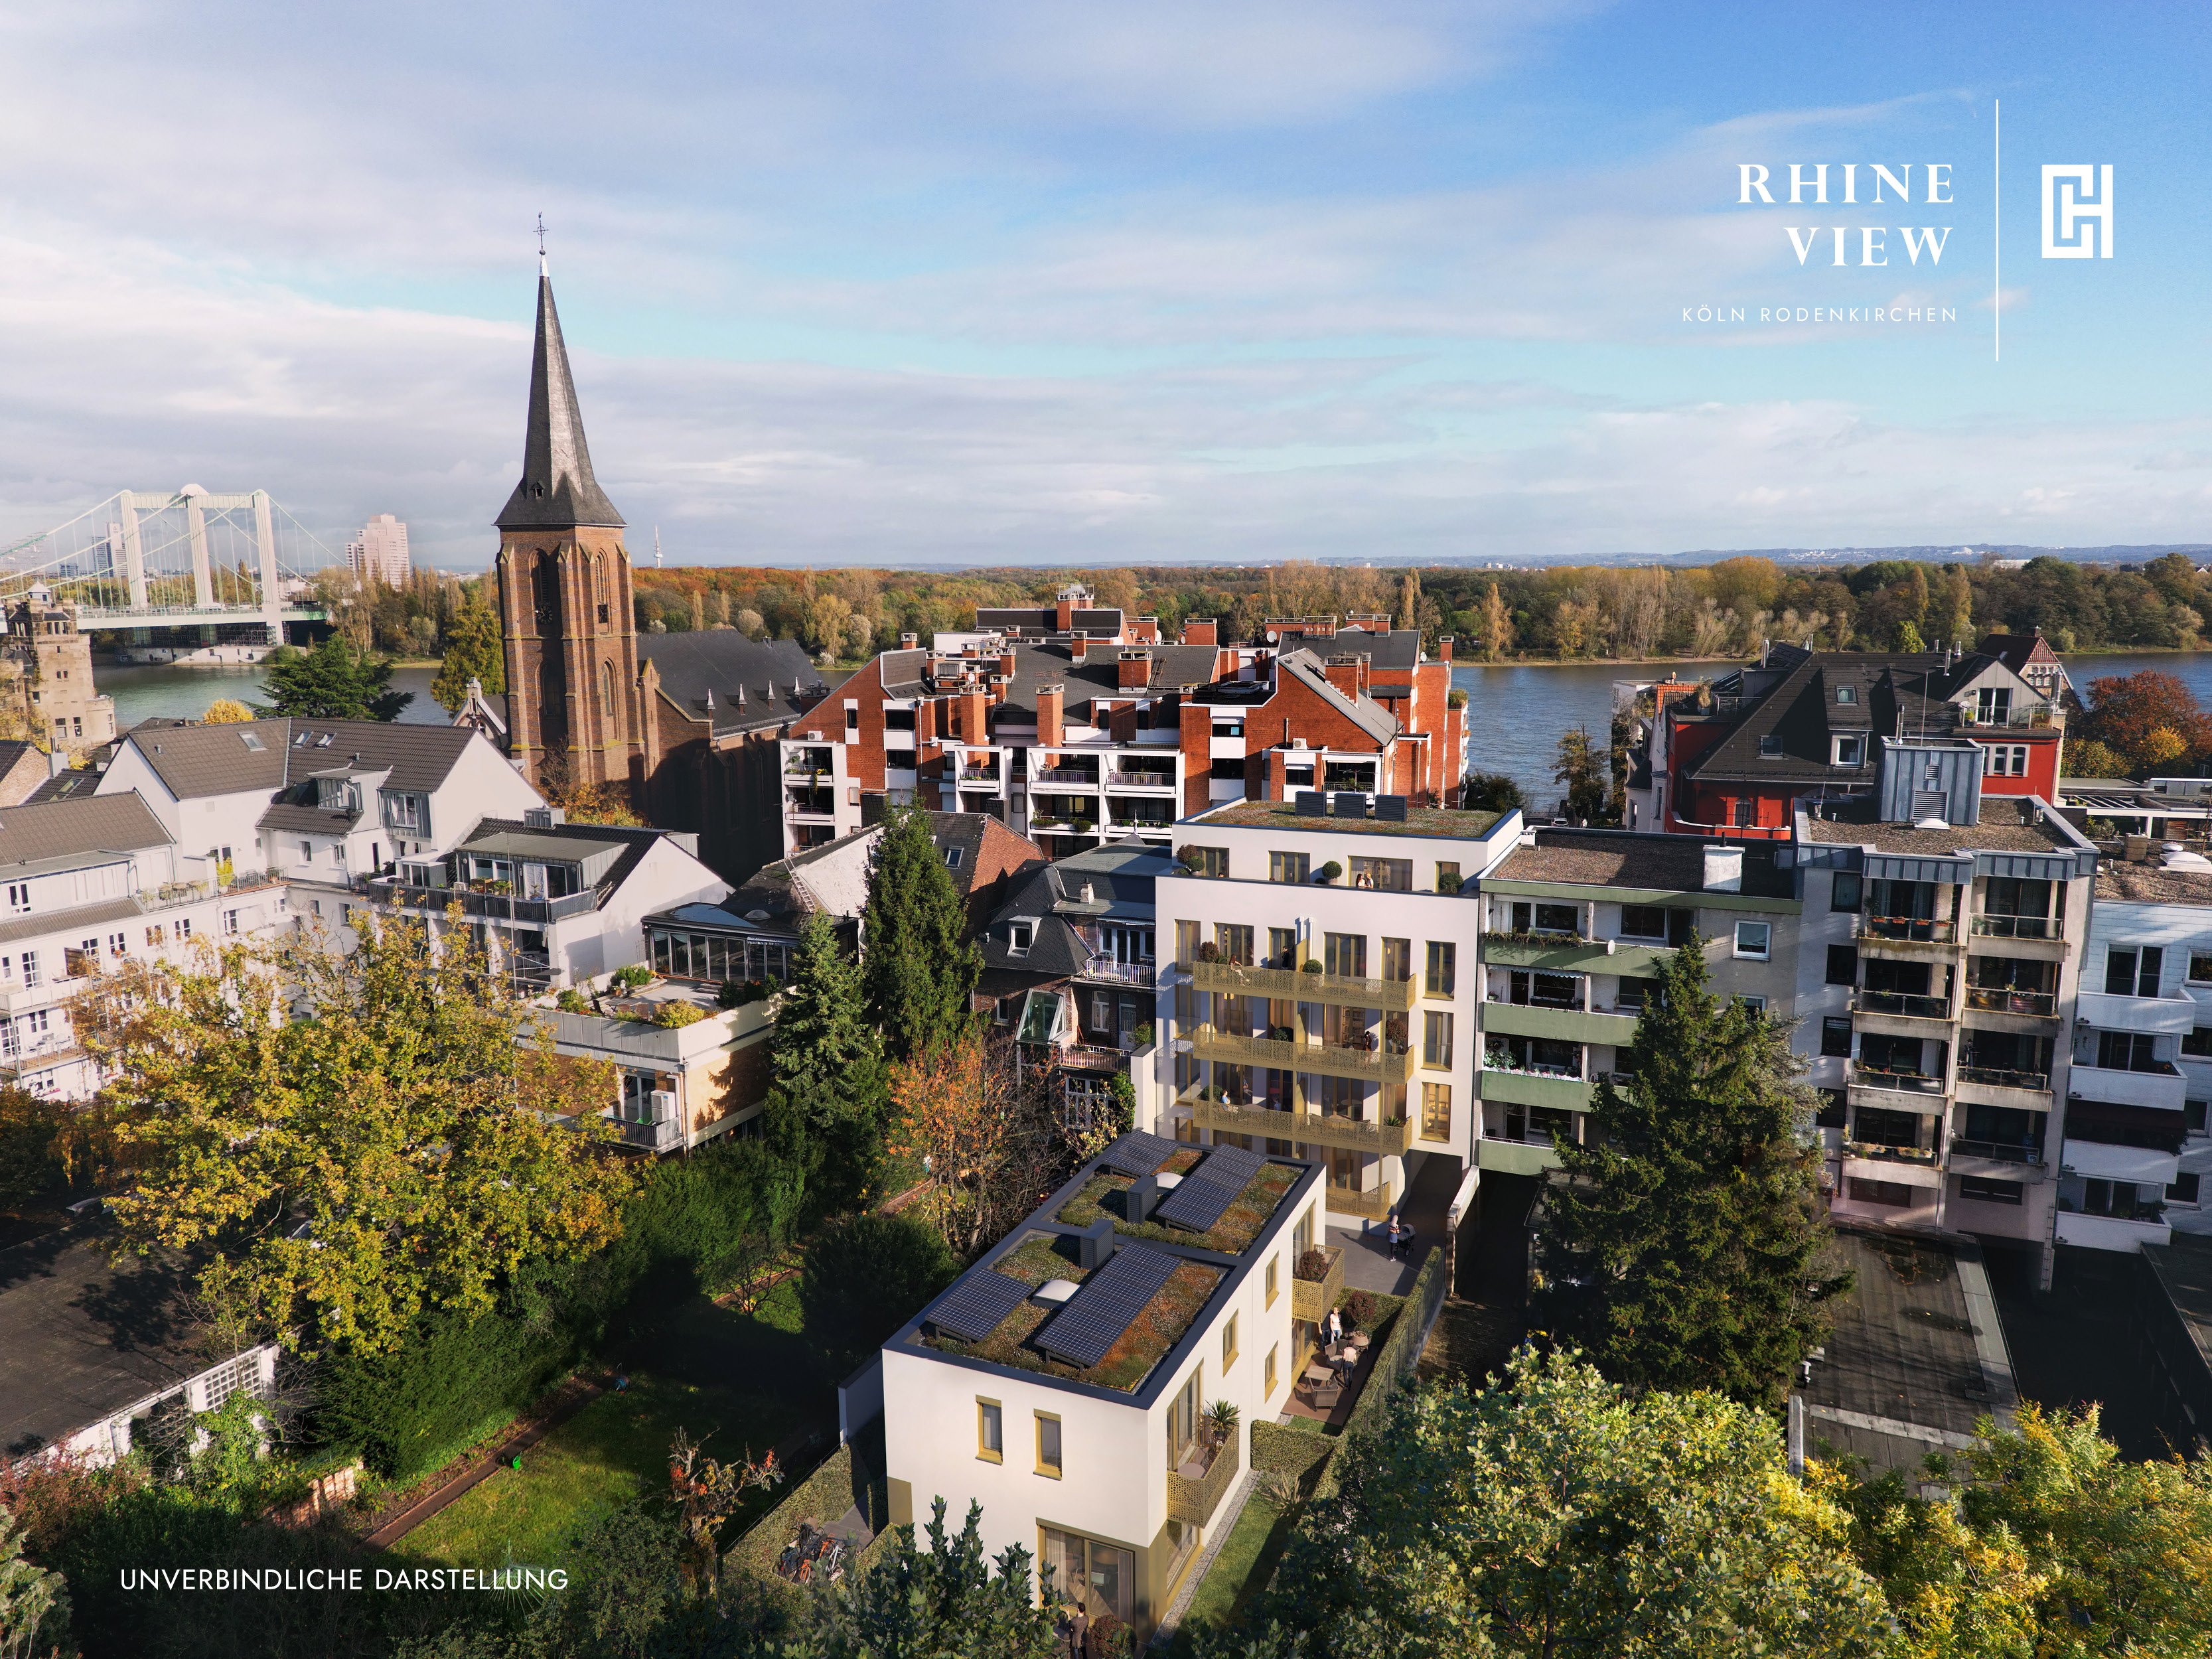 Image new build property Rhineview, Cologne